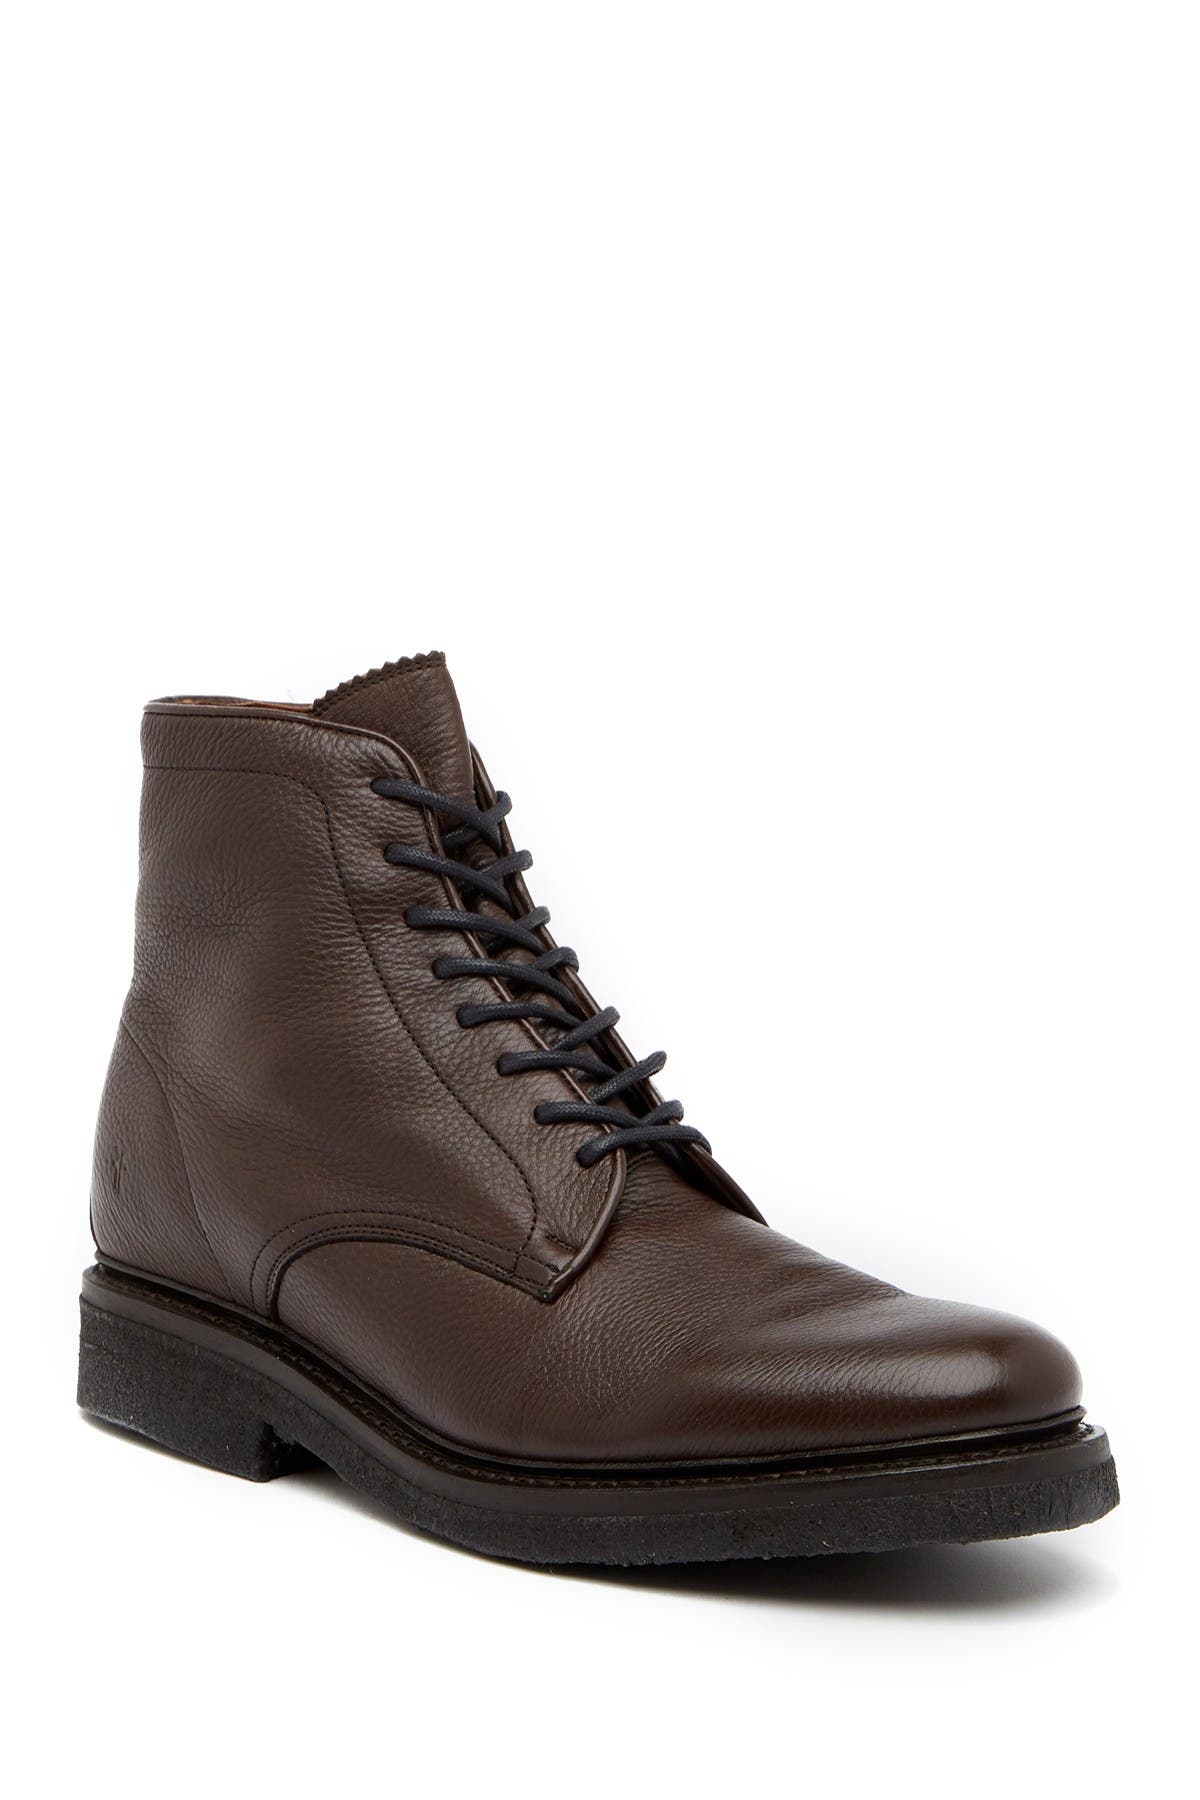 Frye | Country Lace-Up Leather Boot 